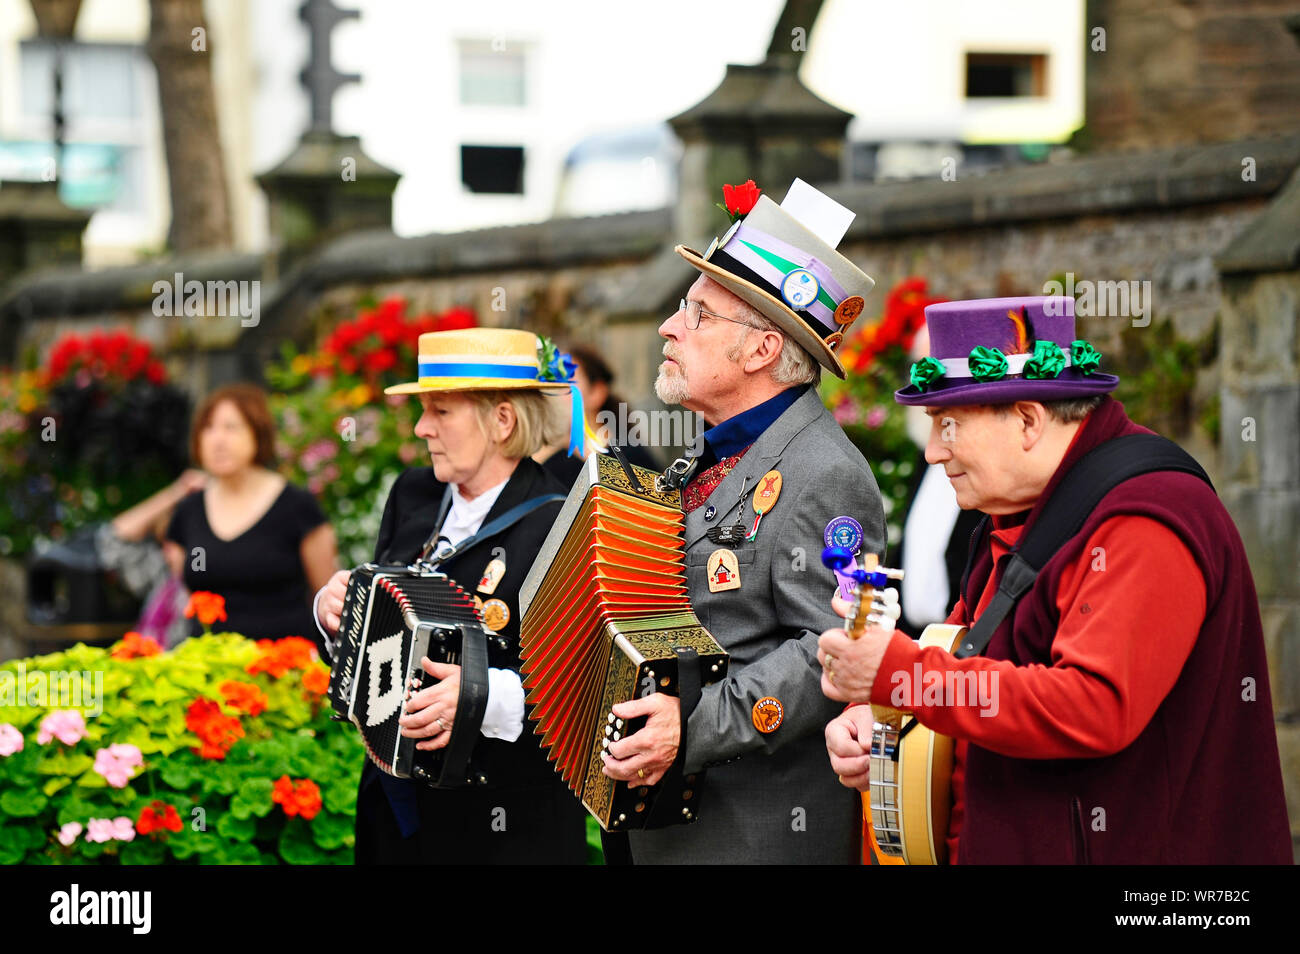 Musical accompanyment to the Morris dance display in Poulton-Le-fylde town centre Stock Photo